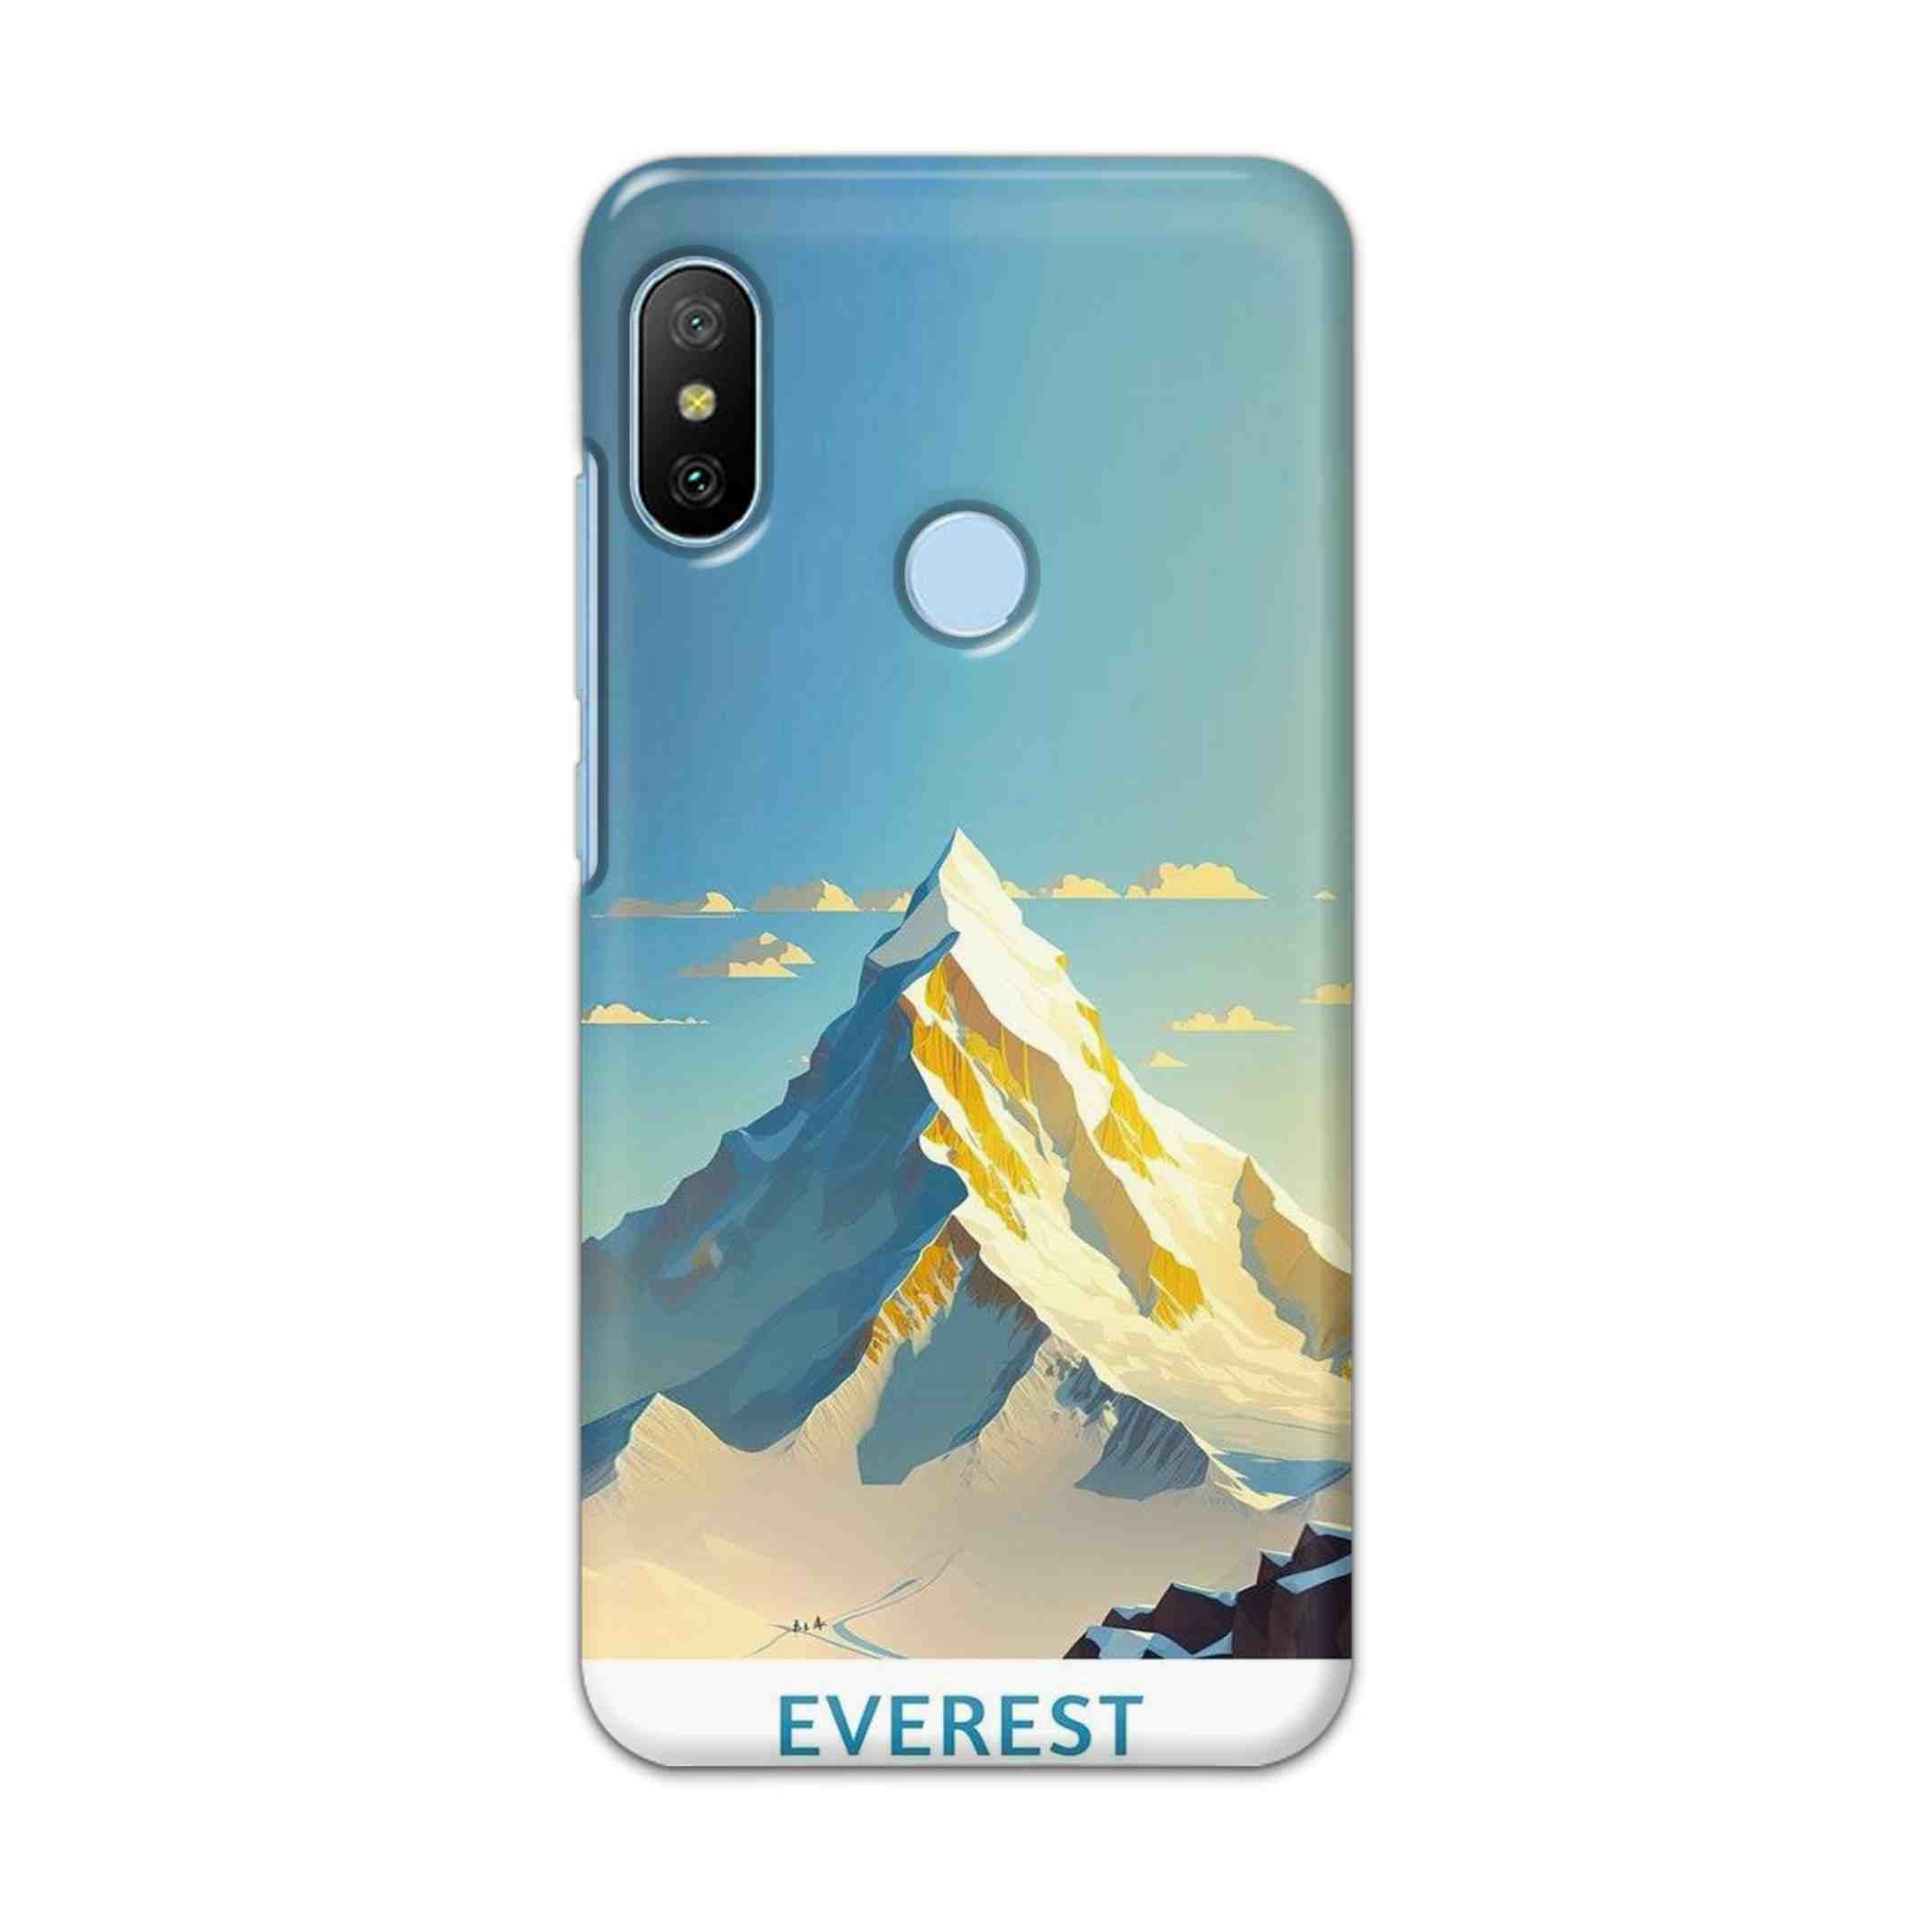 Buy Everest Hard Back Mobile Phone Case/Cover For Xiaomi A2 / 6X Online